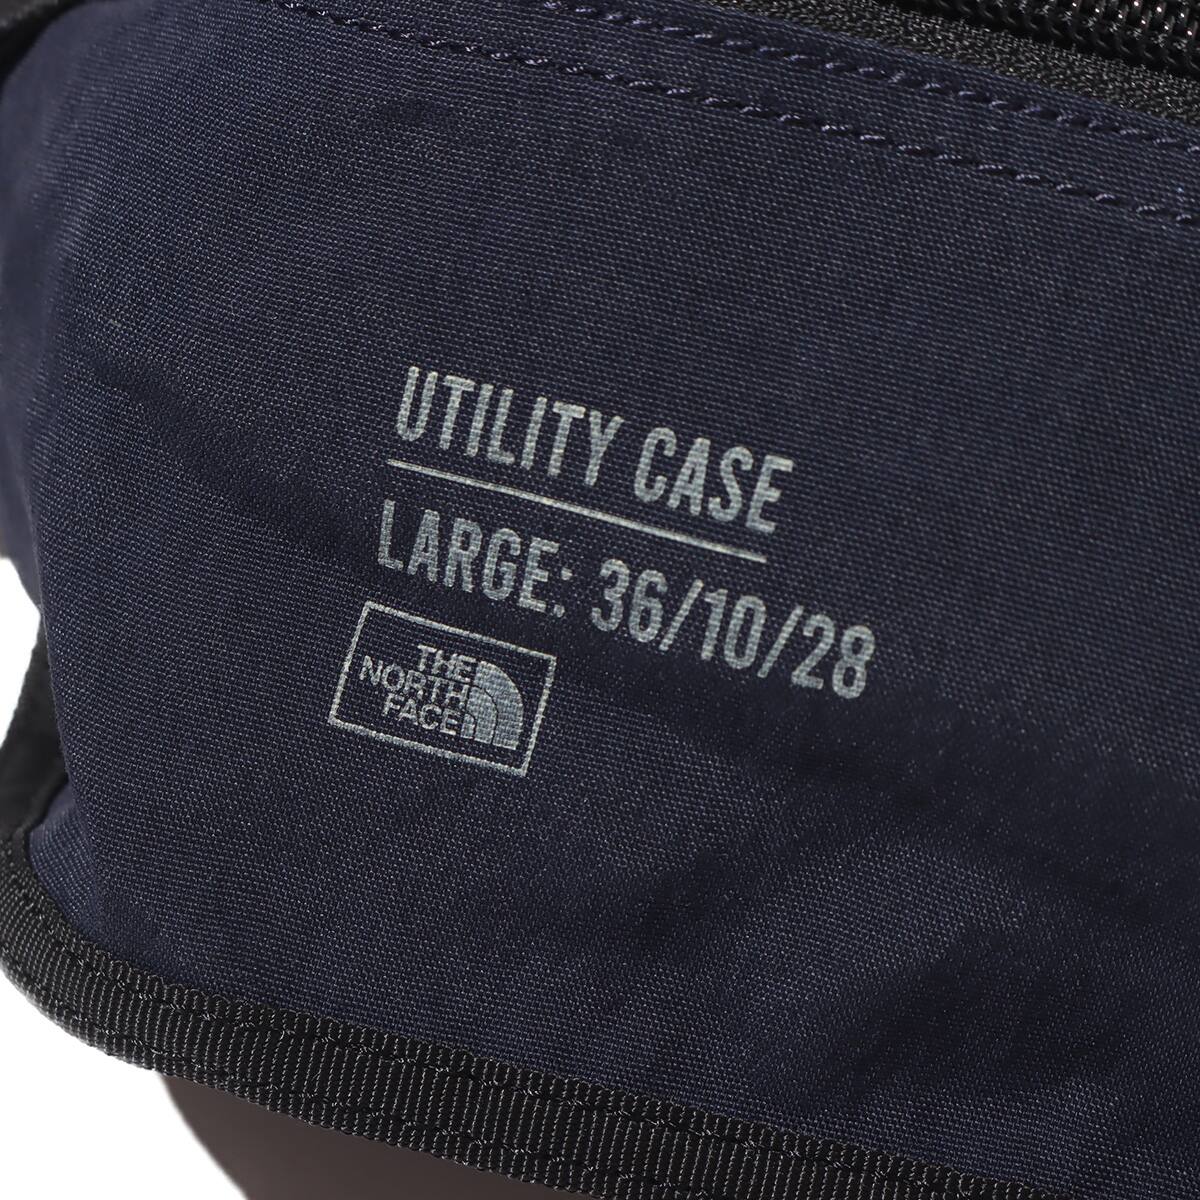 THE NORTH FACE PURPLE LABEL Field Utility Case Navy 23FW-I